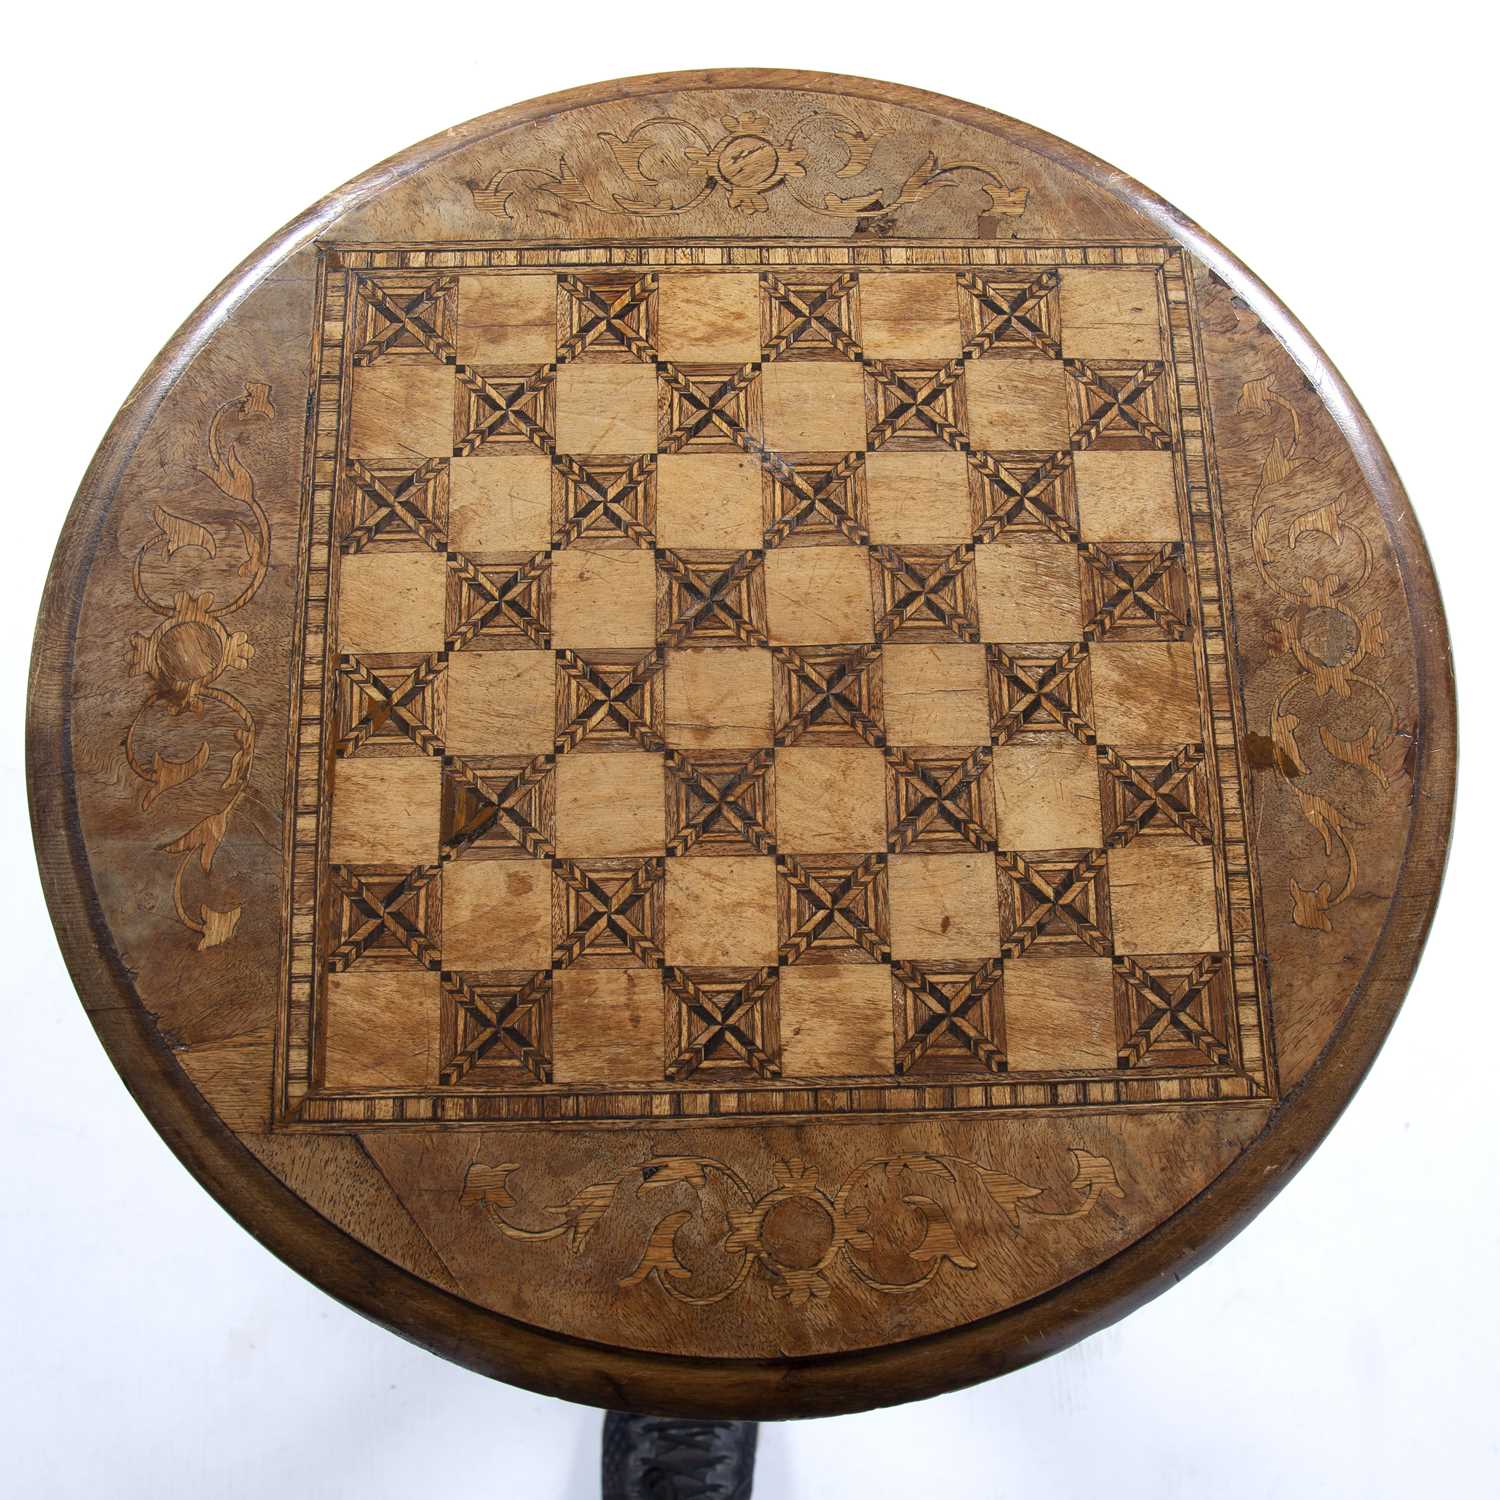 Walnut and inlaid circular sewing table Victorian, with chessboard top, 45cm across x 76cm - Image 3 of 3